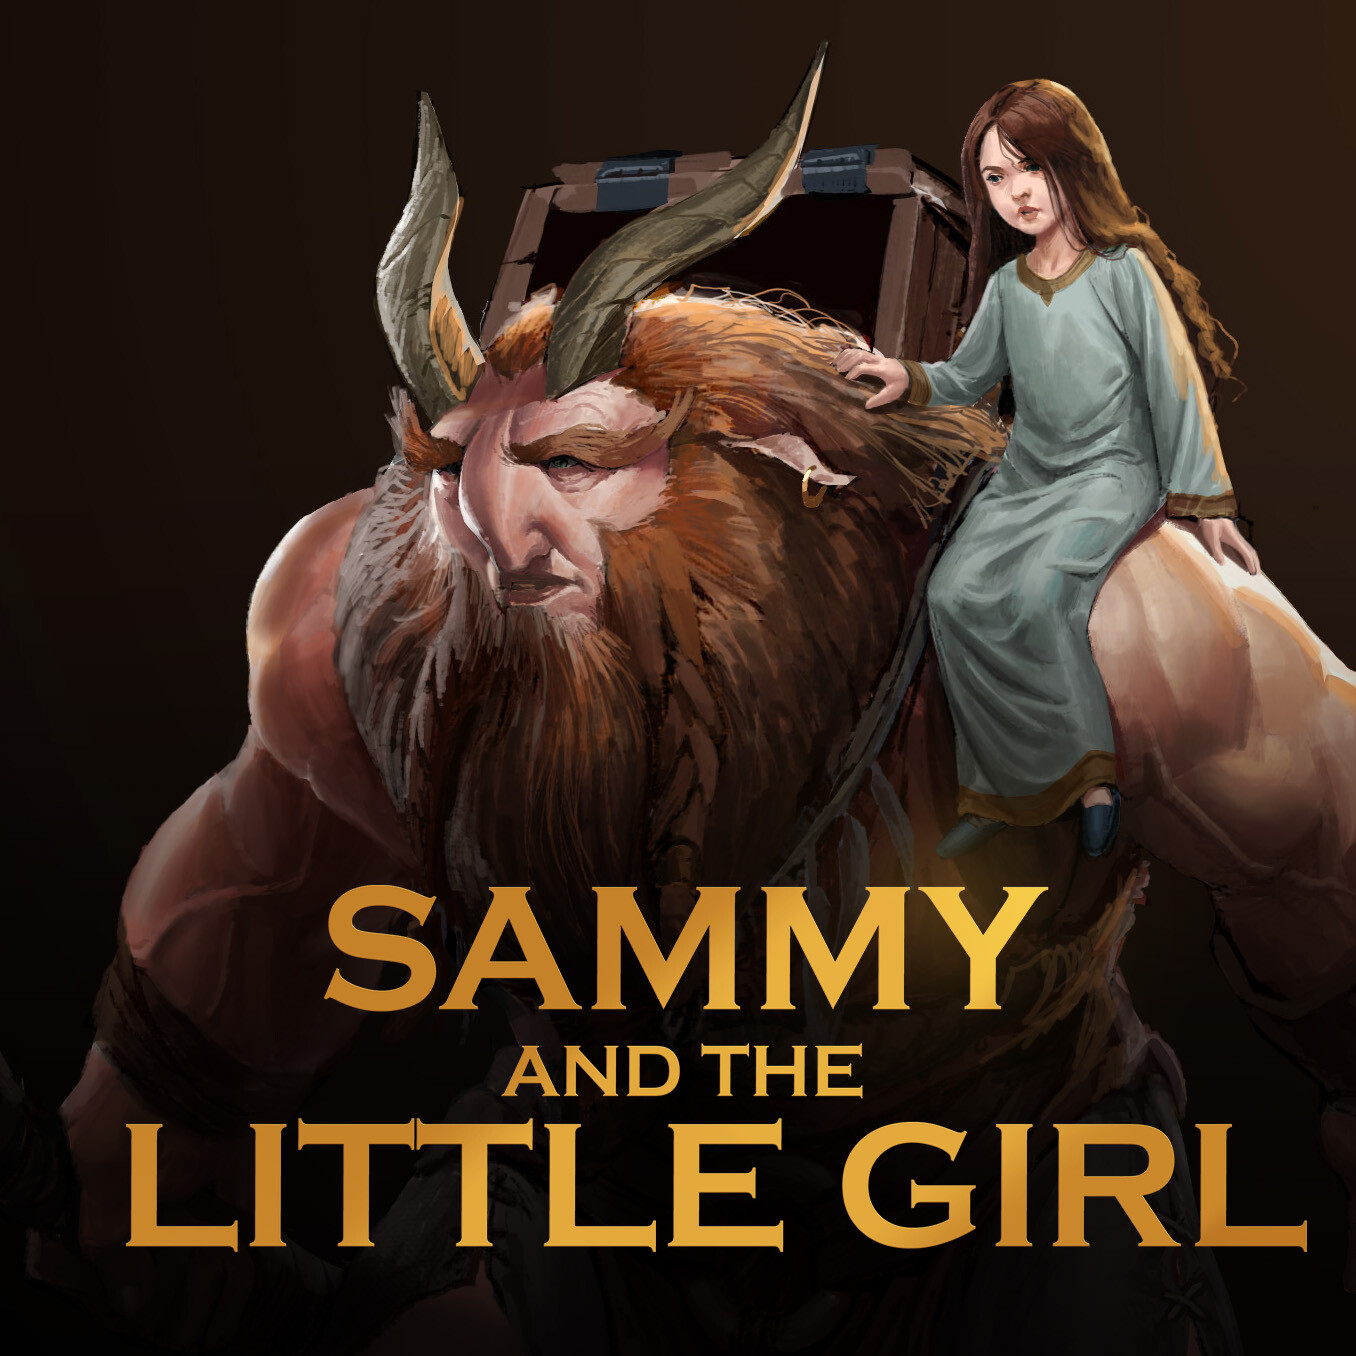 Sammy and the Little Girl